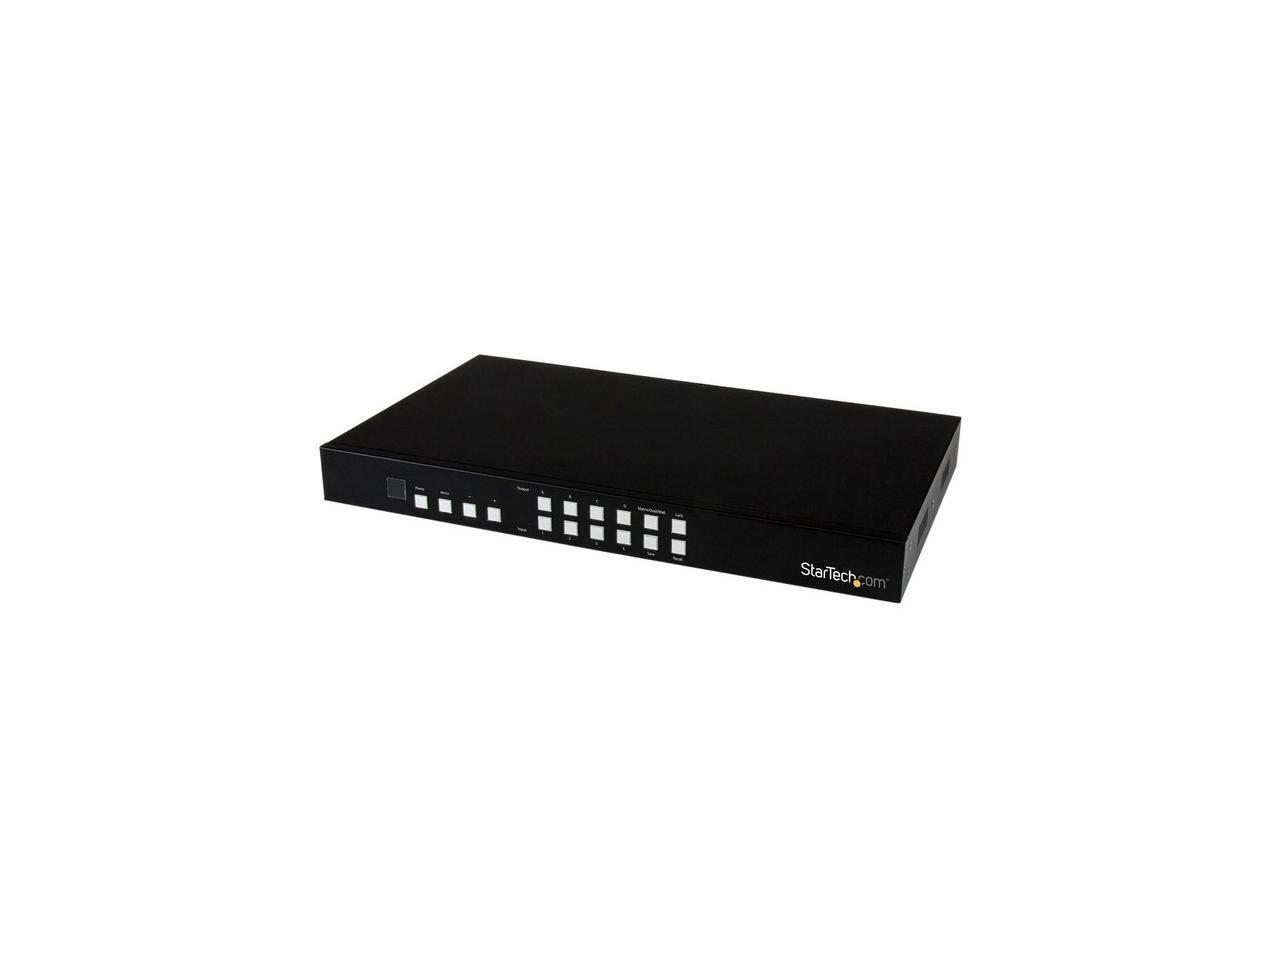 StarTech.com VS424HDPIP 4x4 HDMI Matrix Switch with Picture-and-Picture